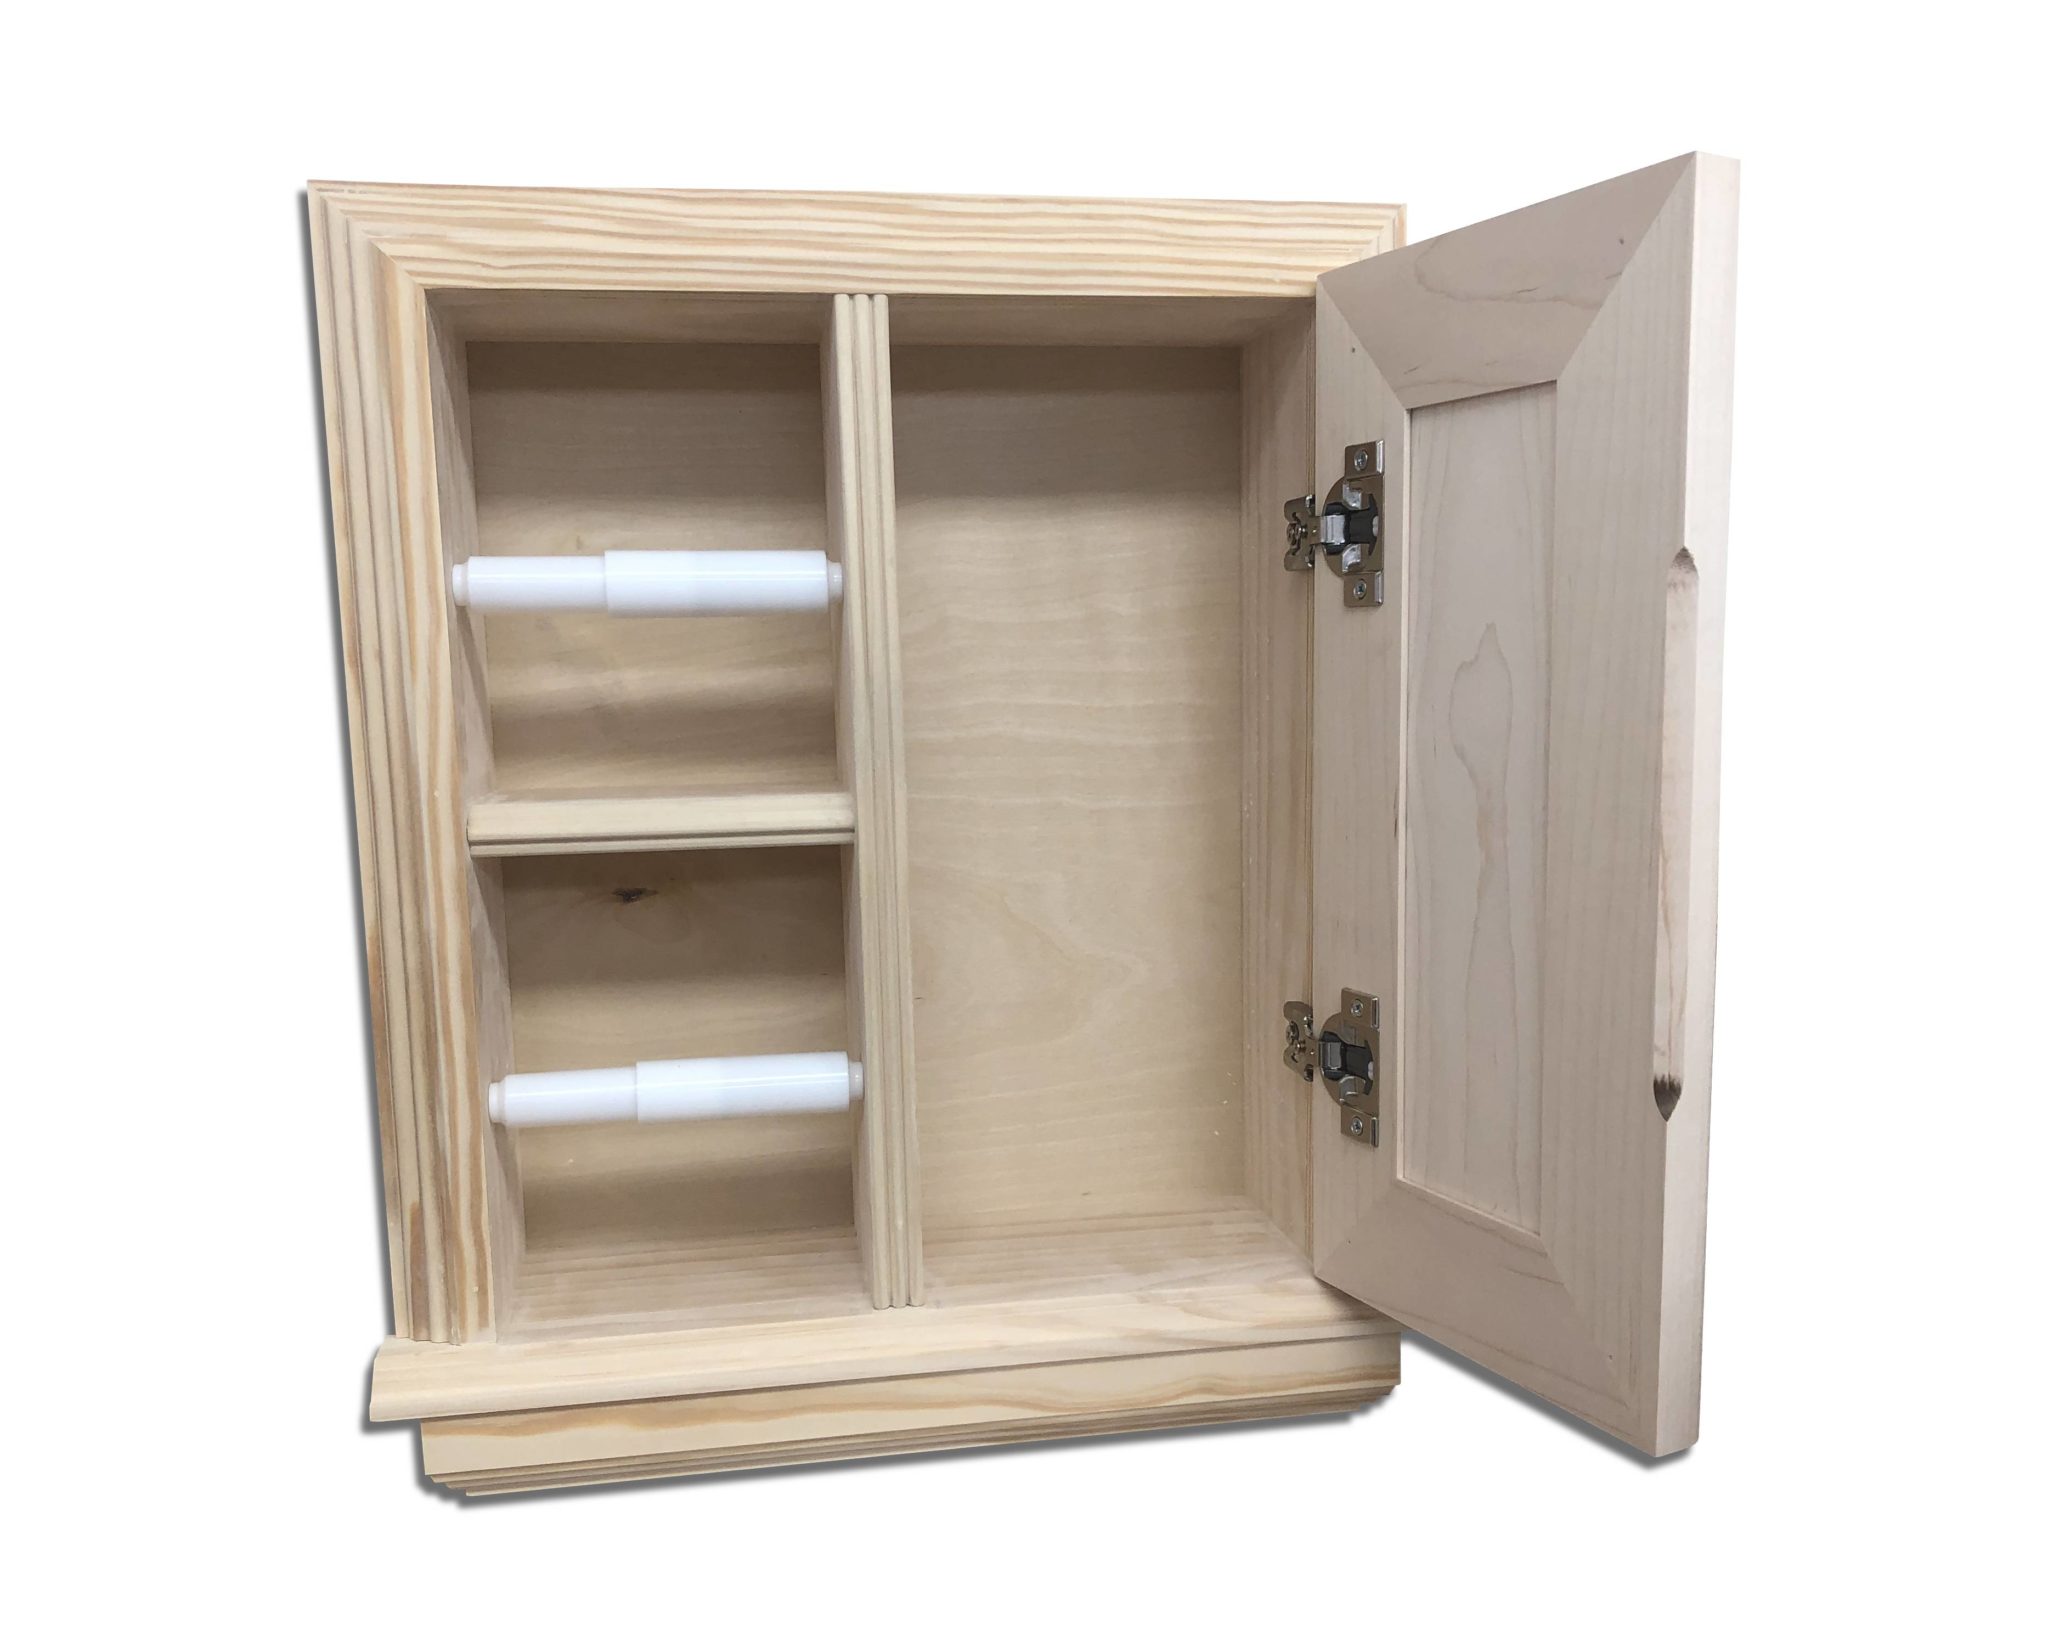 Highlands Solid Wood Double Toilet Paper Holder with Cabinet